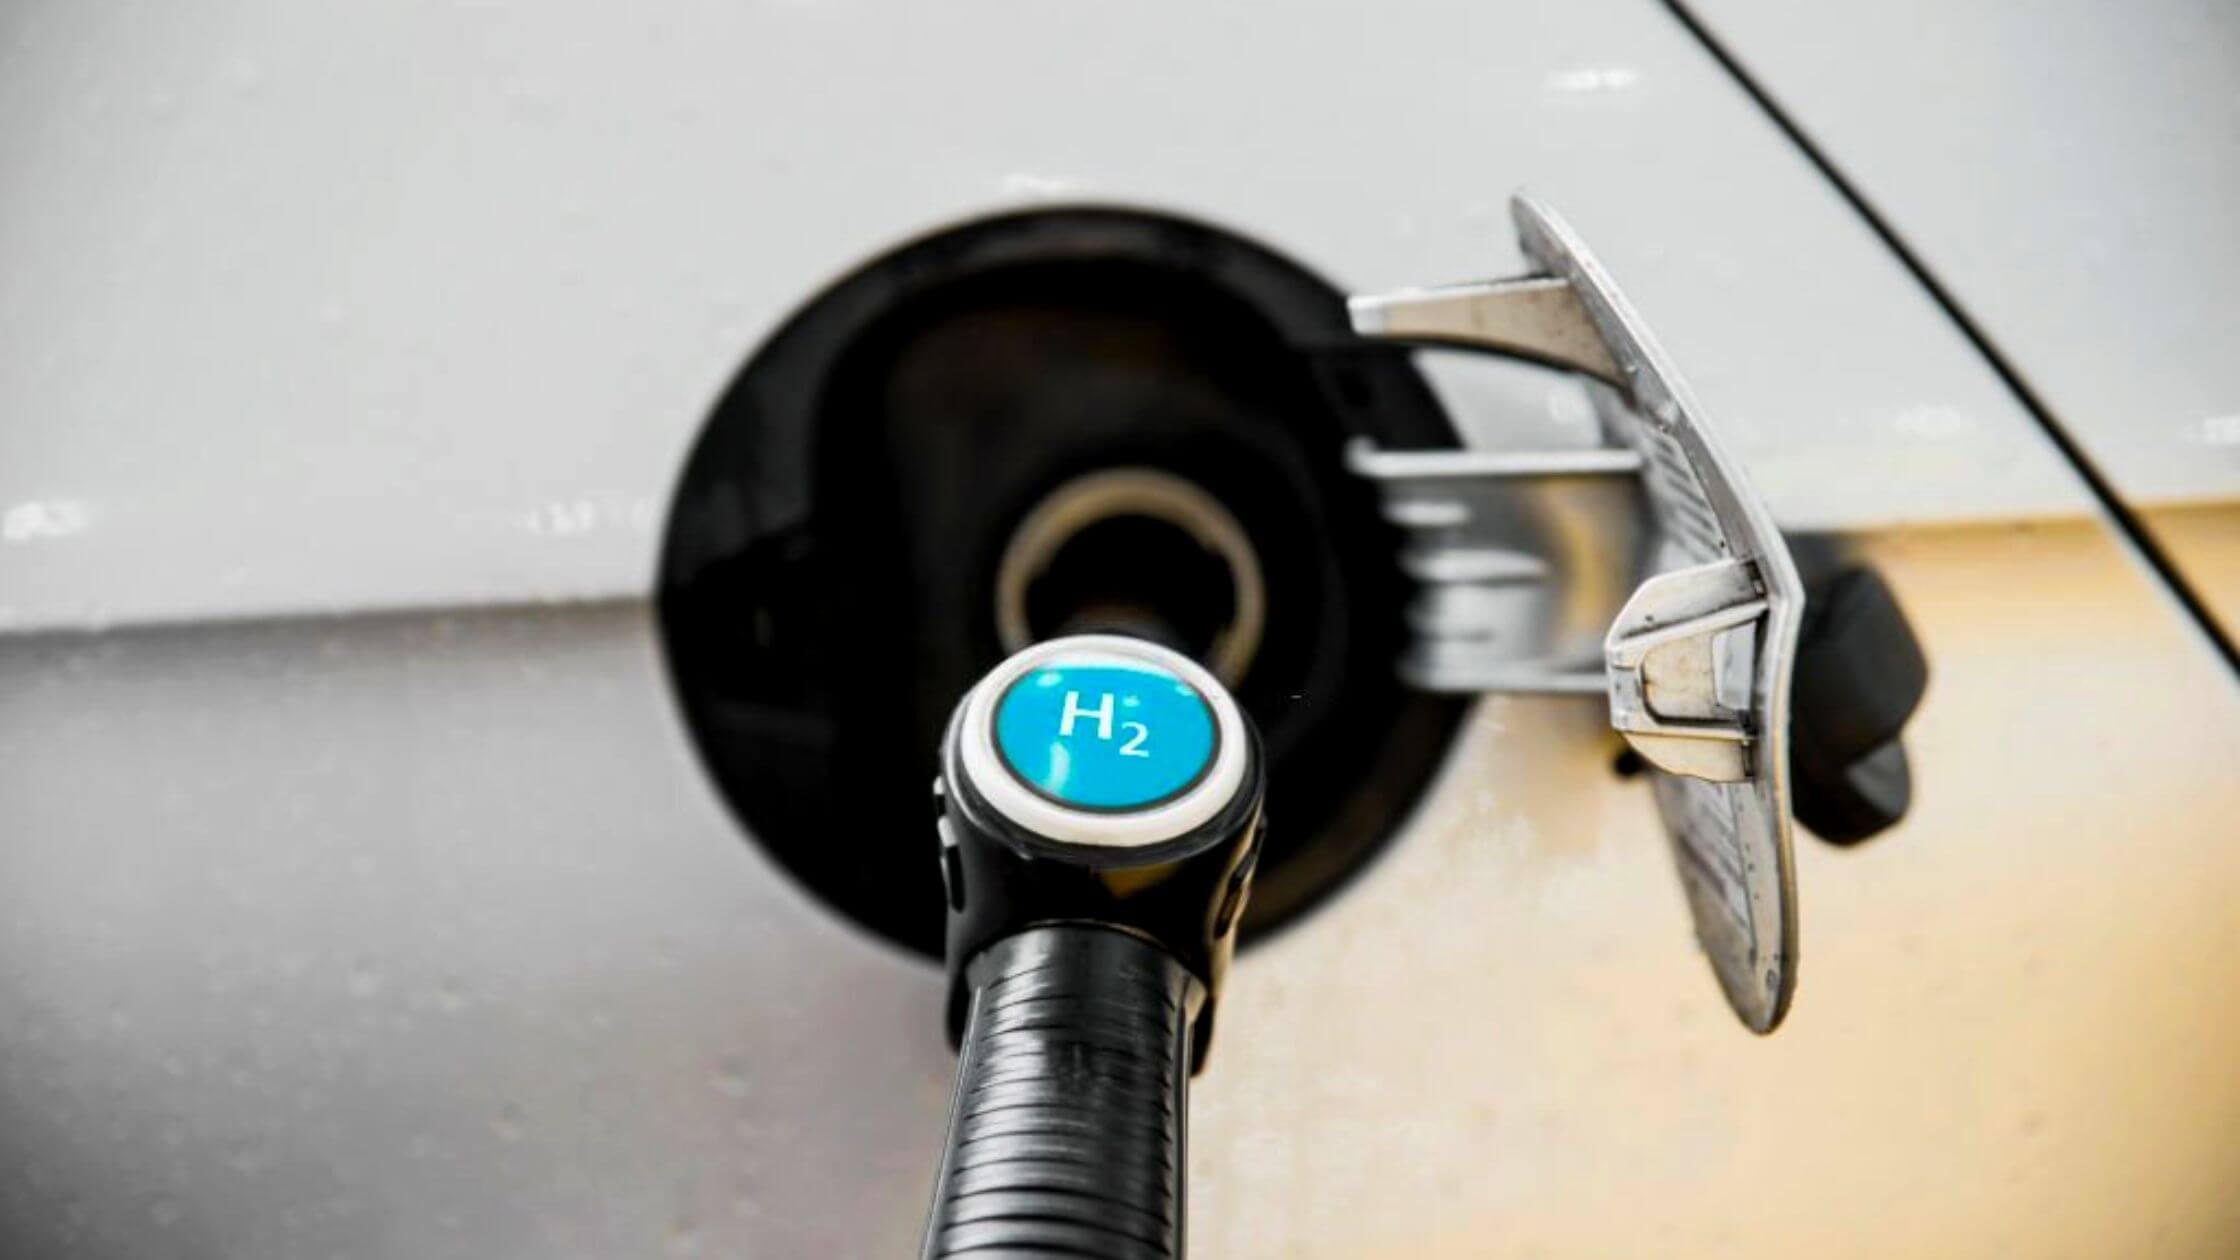 UAE-UK Partnership Could Enable The Use Of Clean Hydrogen